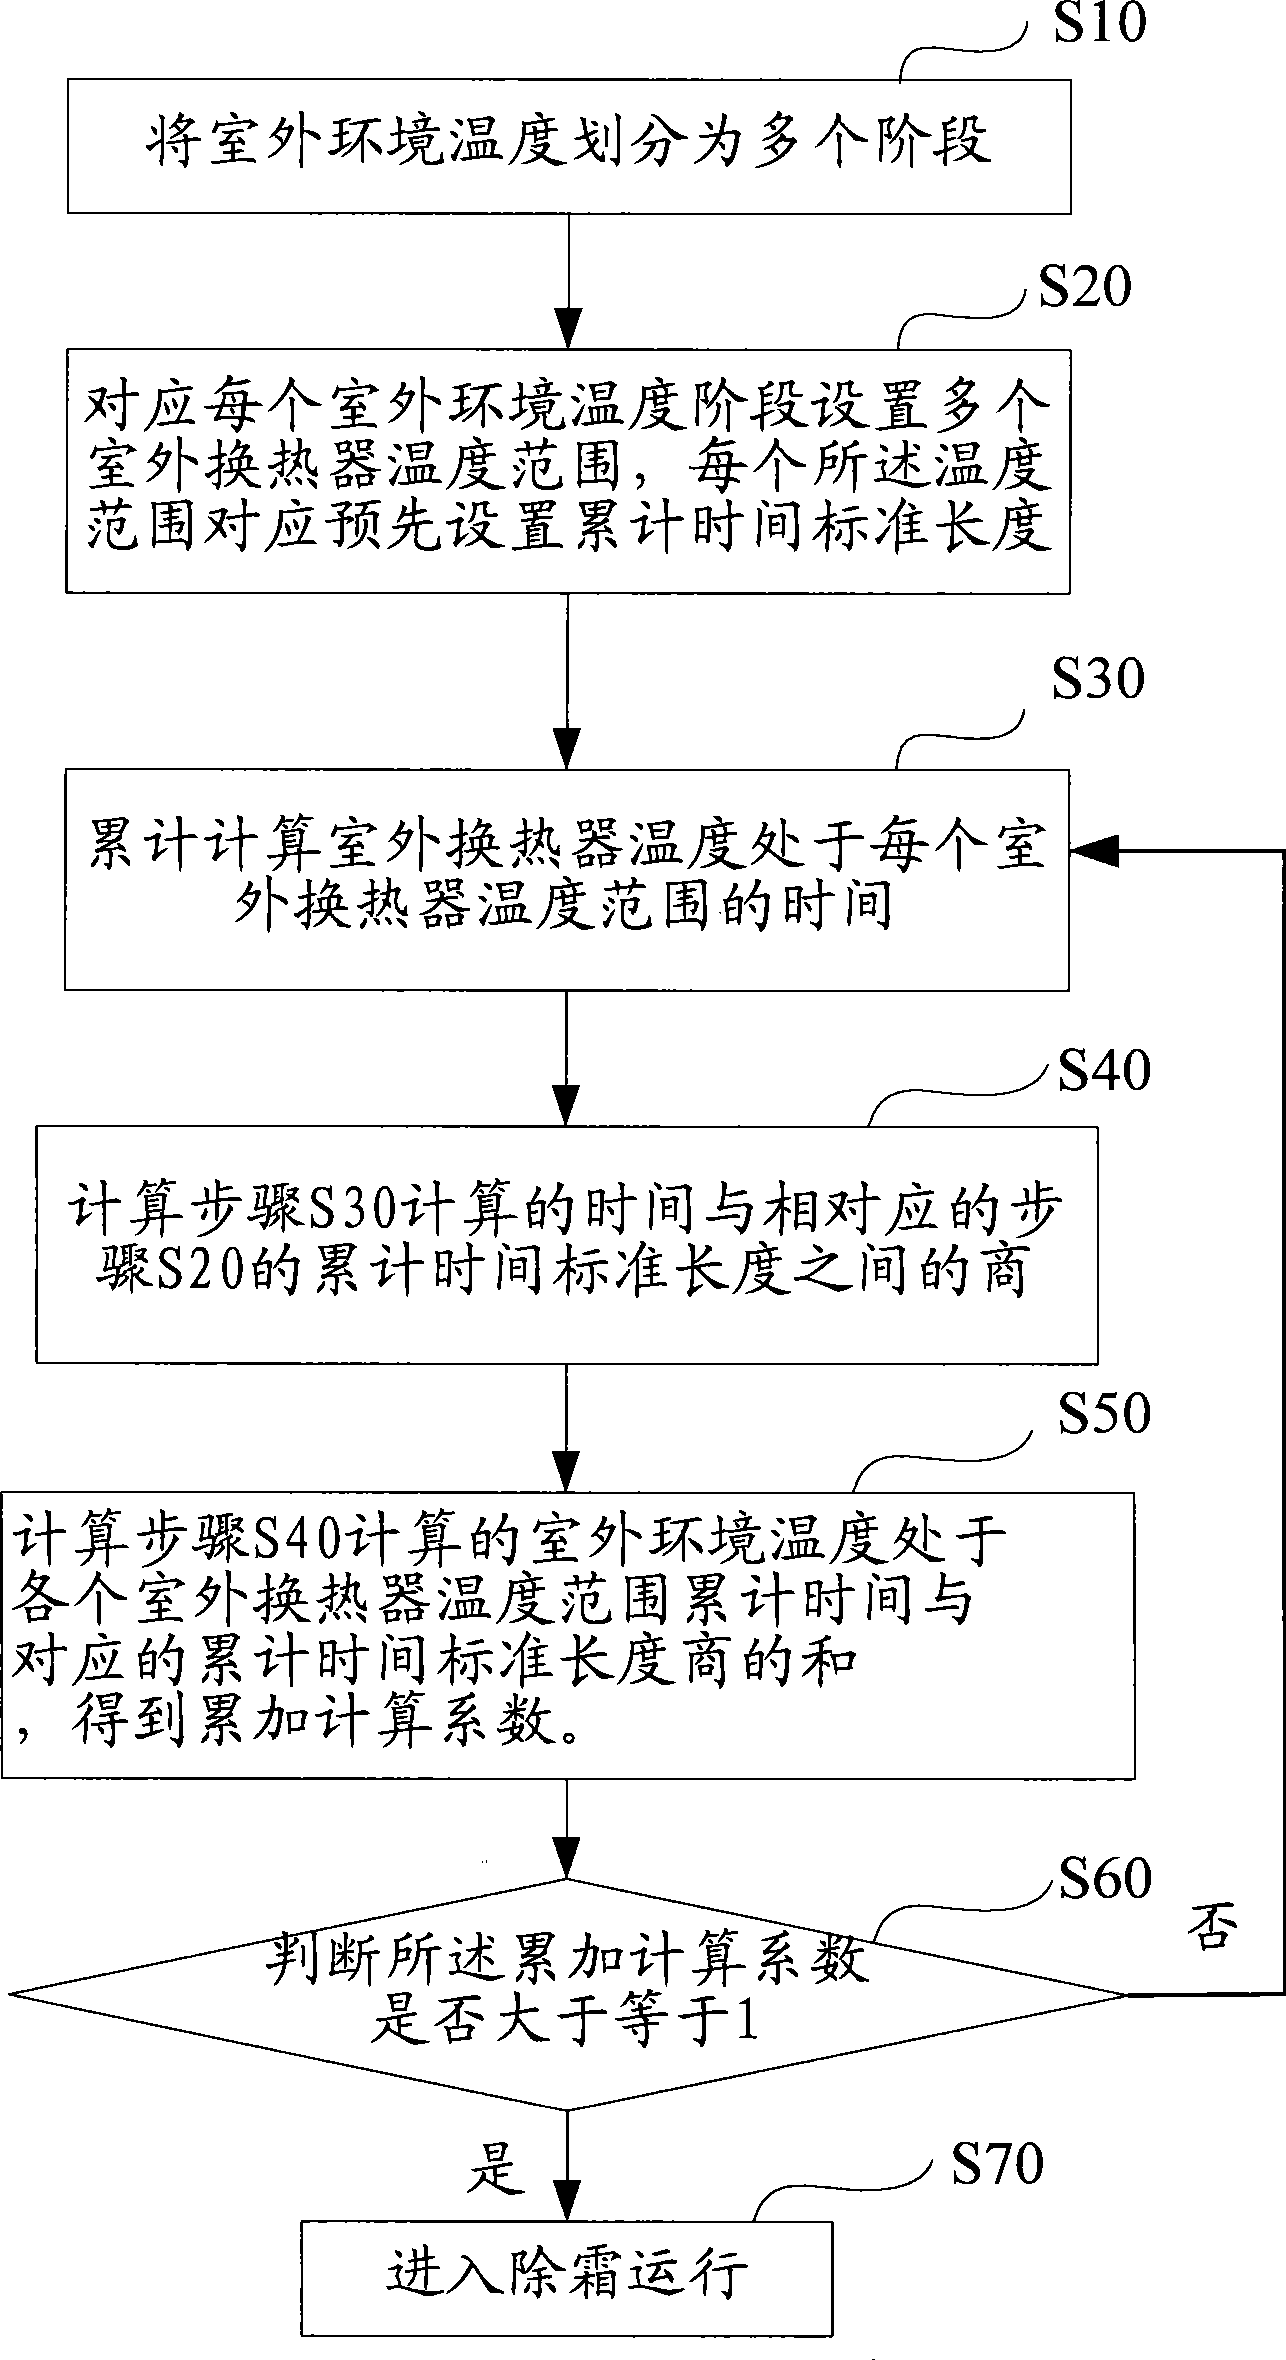 Defrosting control method for heat pump air conditioner